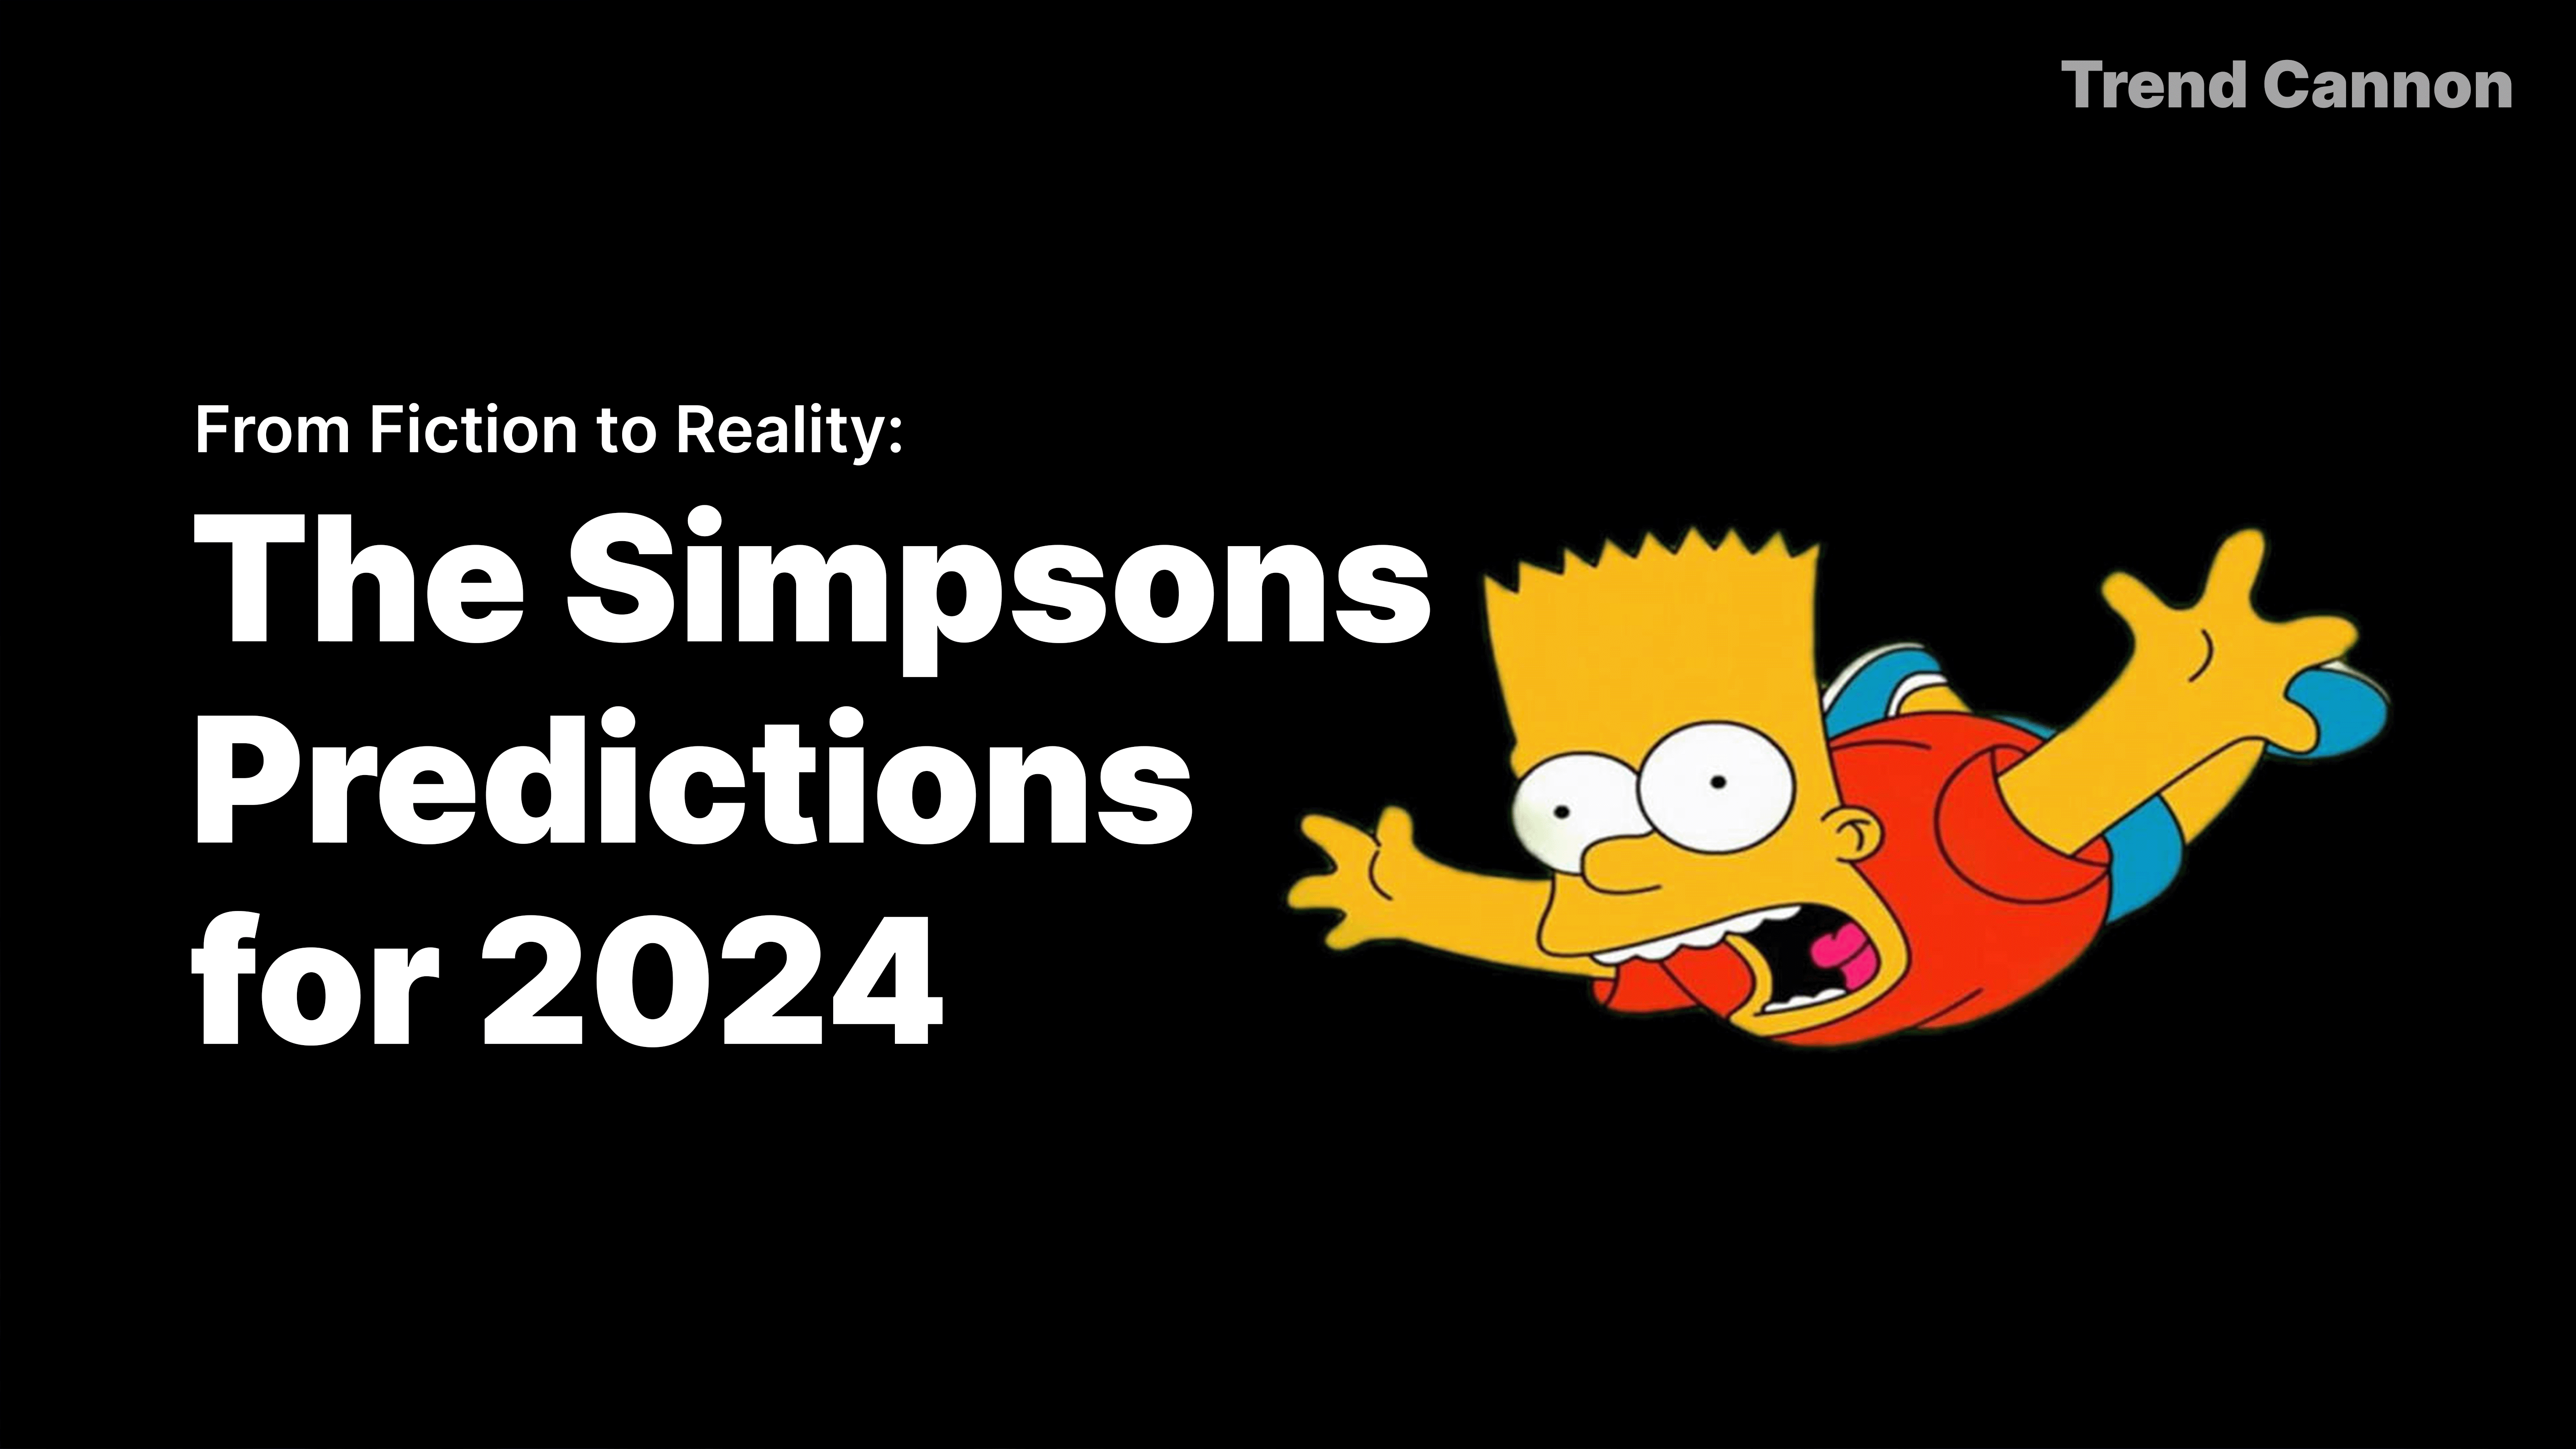 From Fiction to Reality The Simpsons Predictions for 2024 Trend Cannon